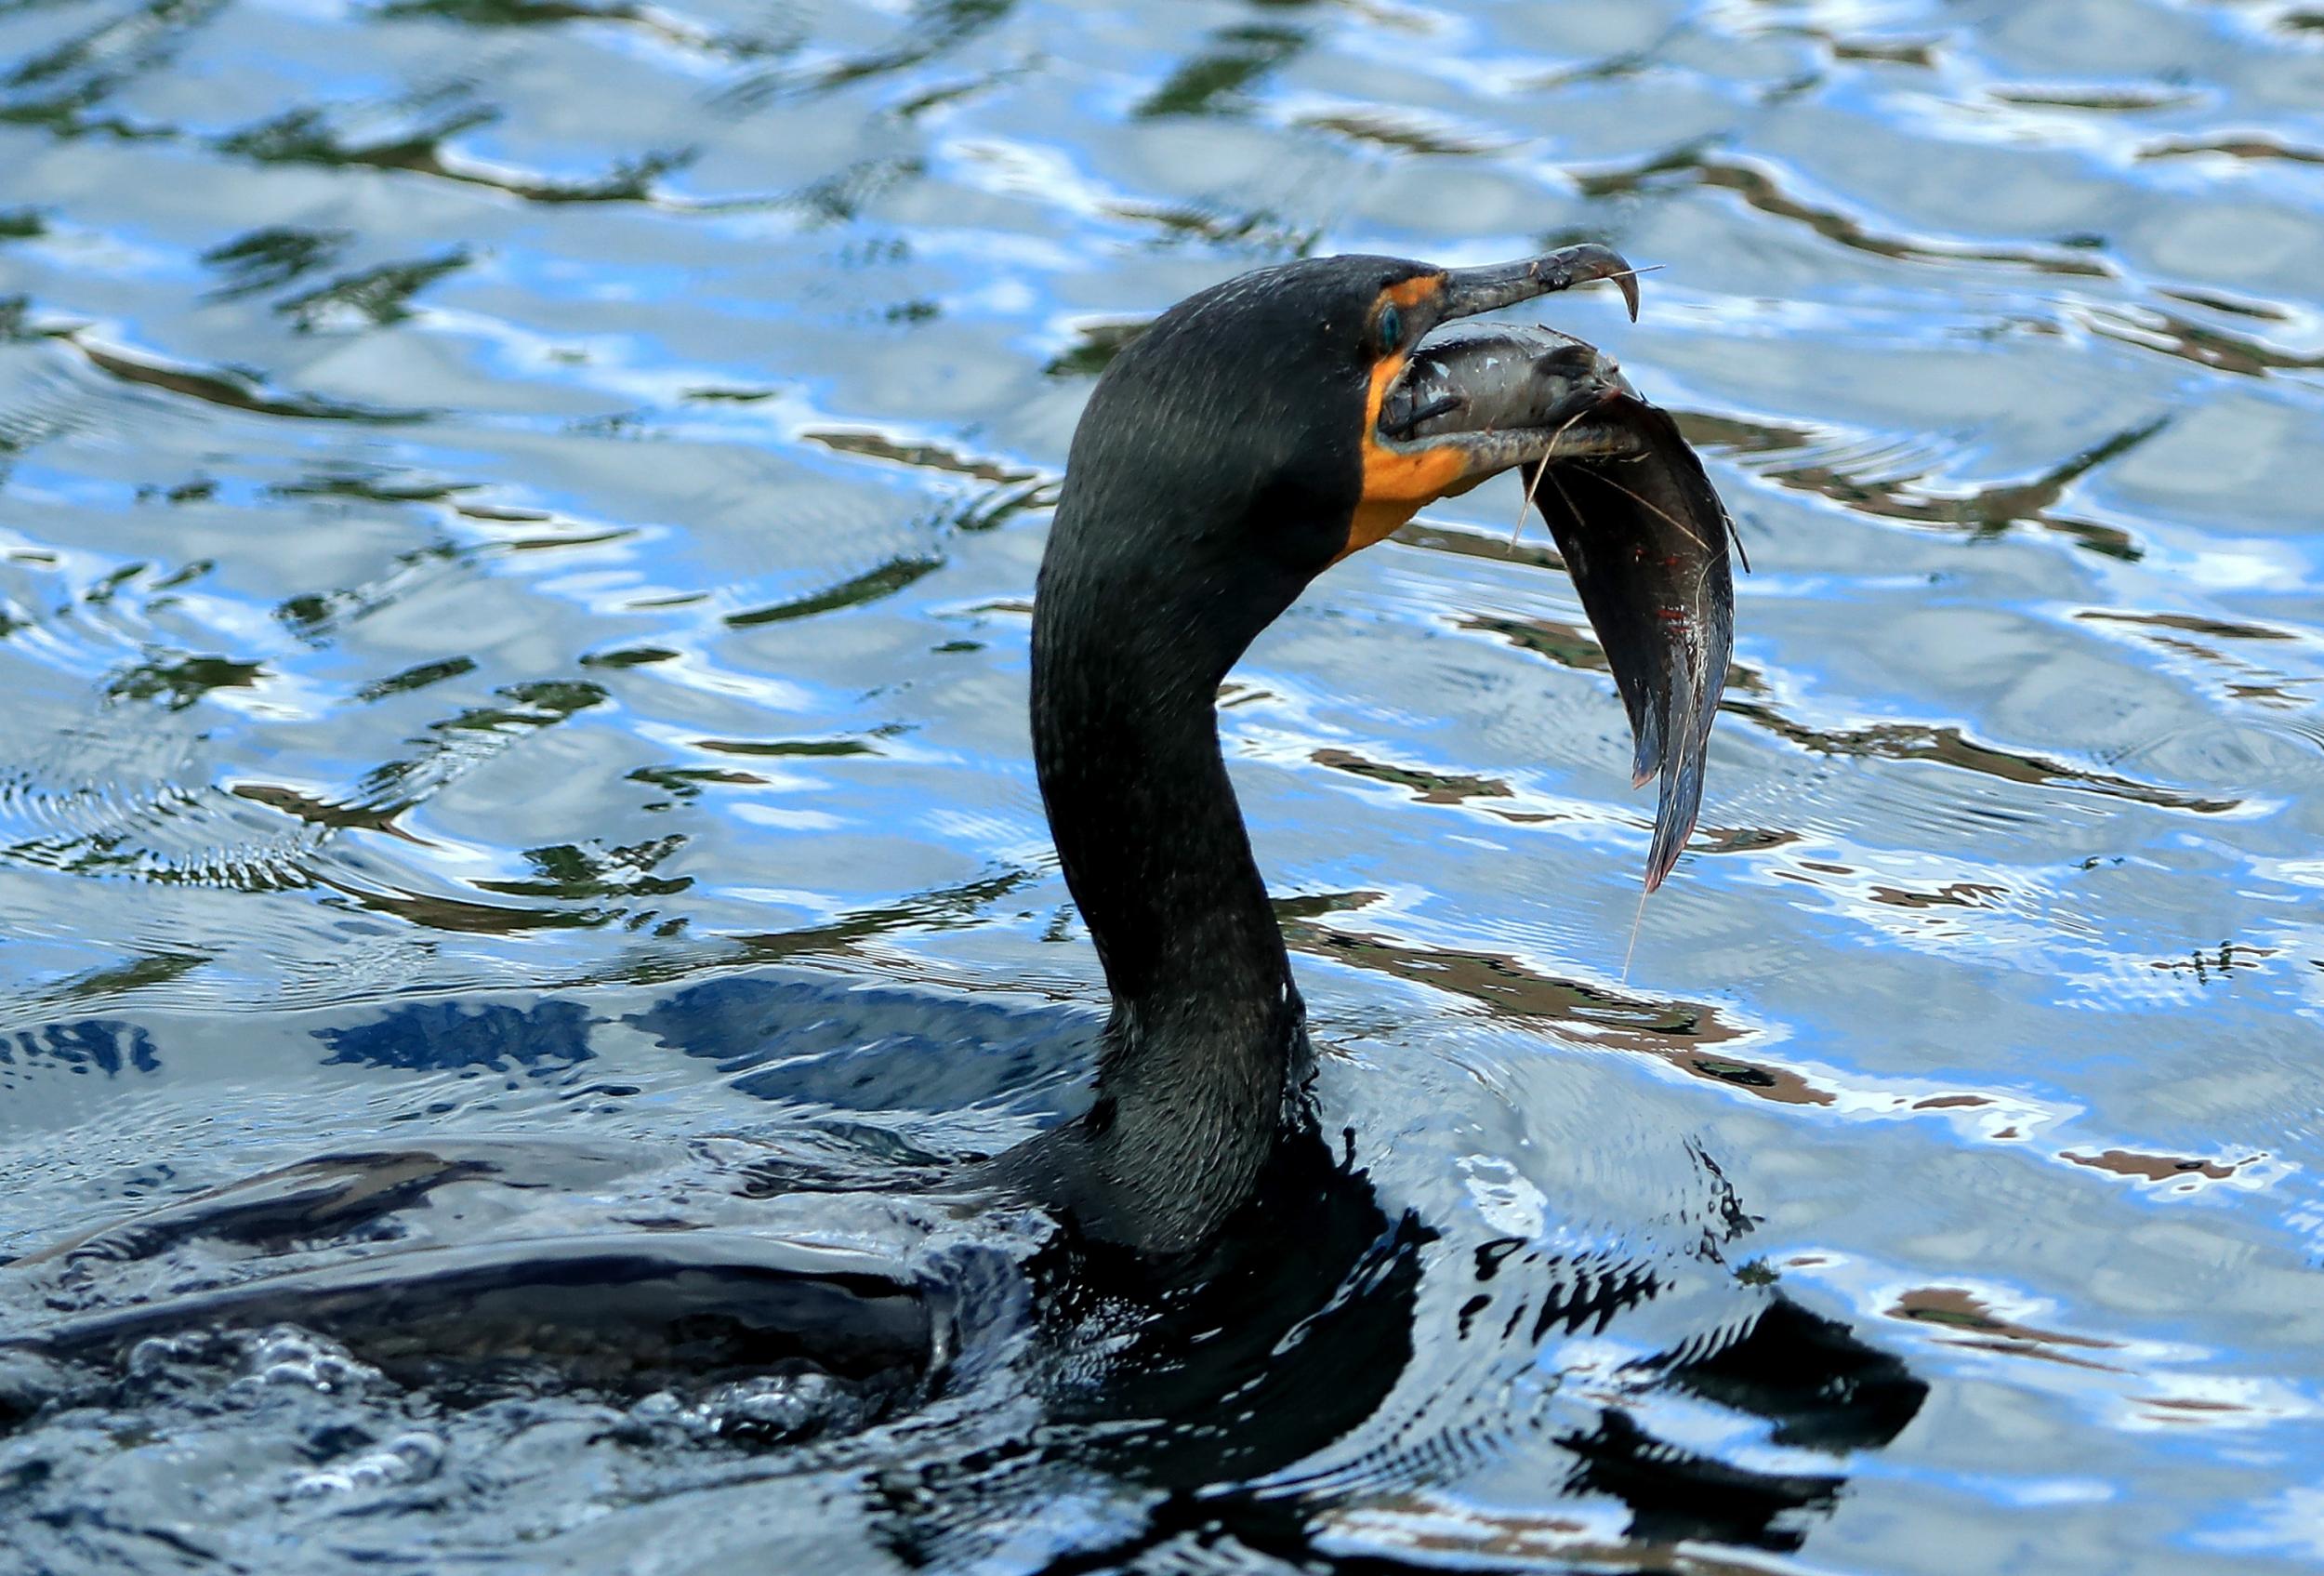 Caught in the act: A cormorant catches a fish